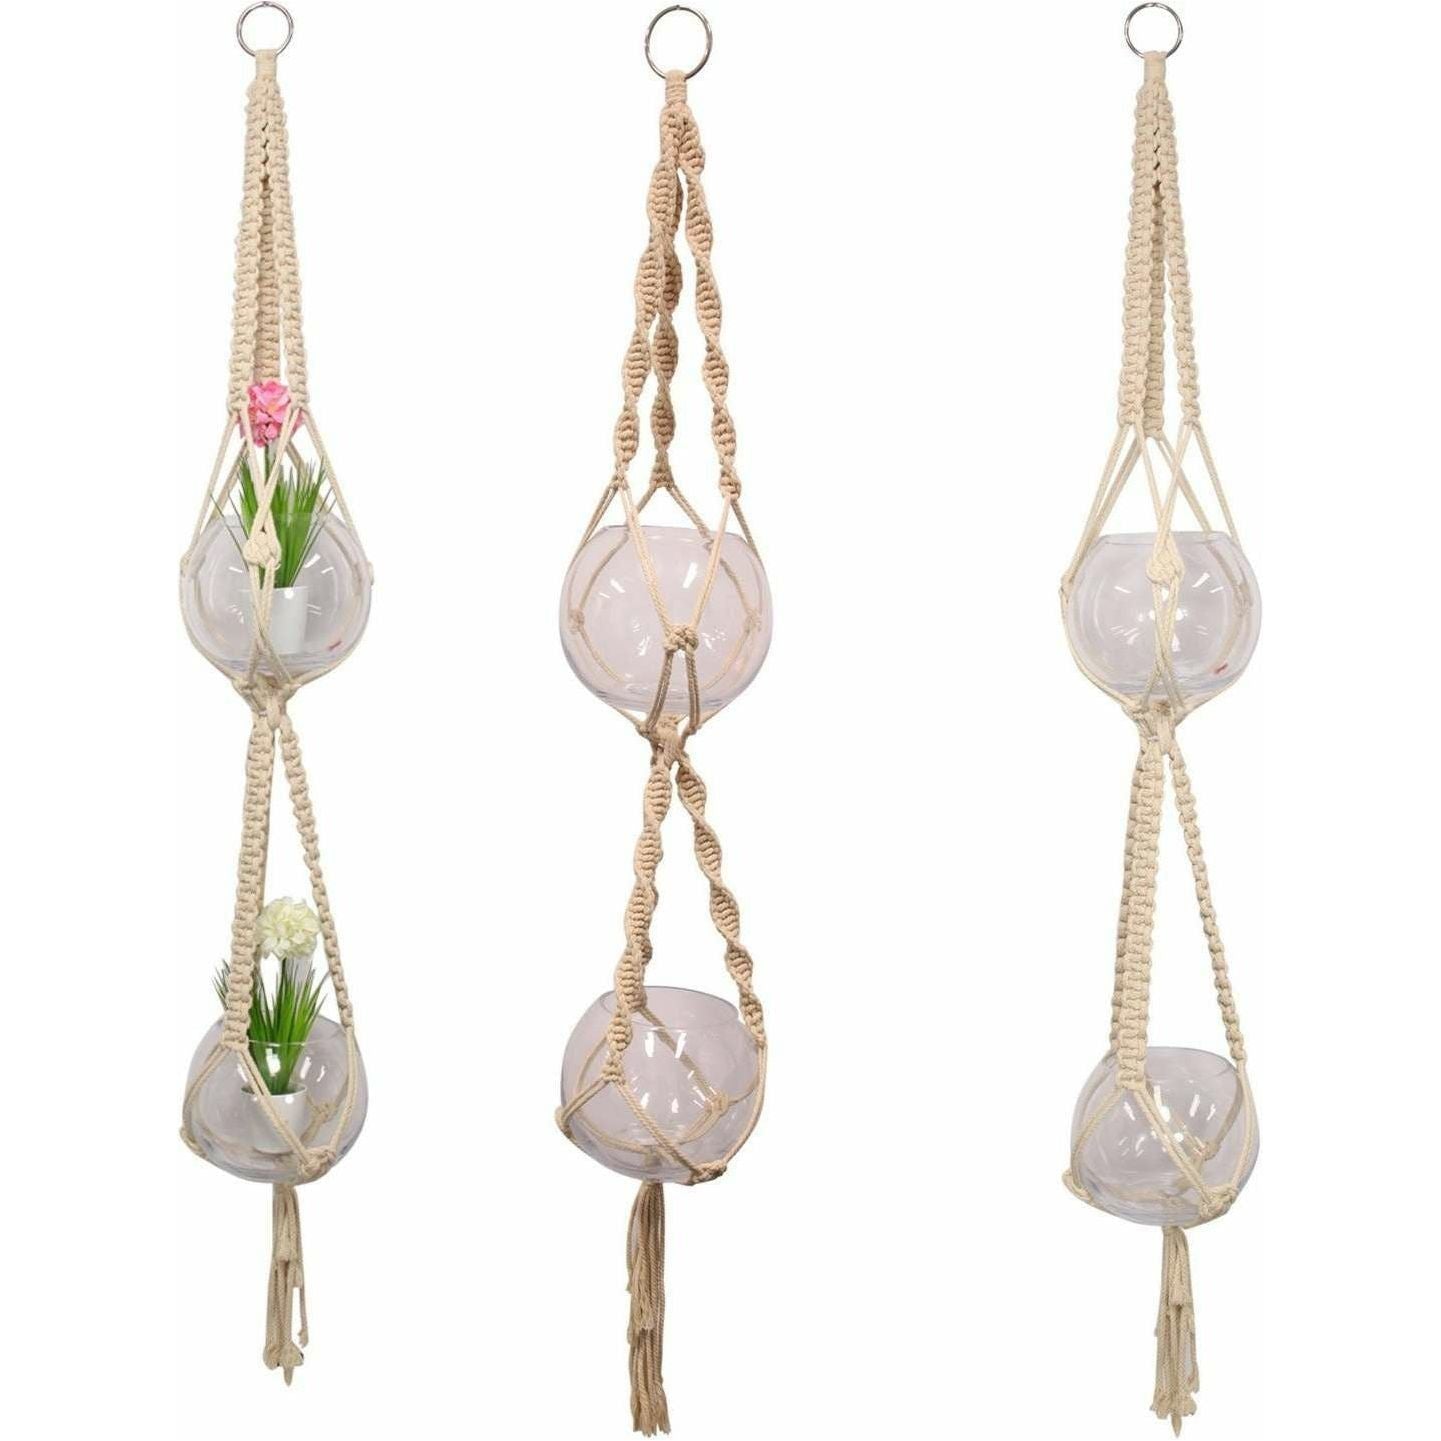 Hanging Double Macrame Pot Holder Incl Glass Bowls - 1pce Assorted 140cm - Dollars and Sense